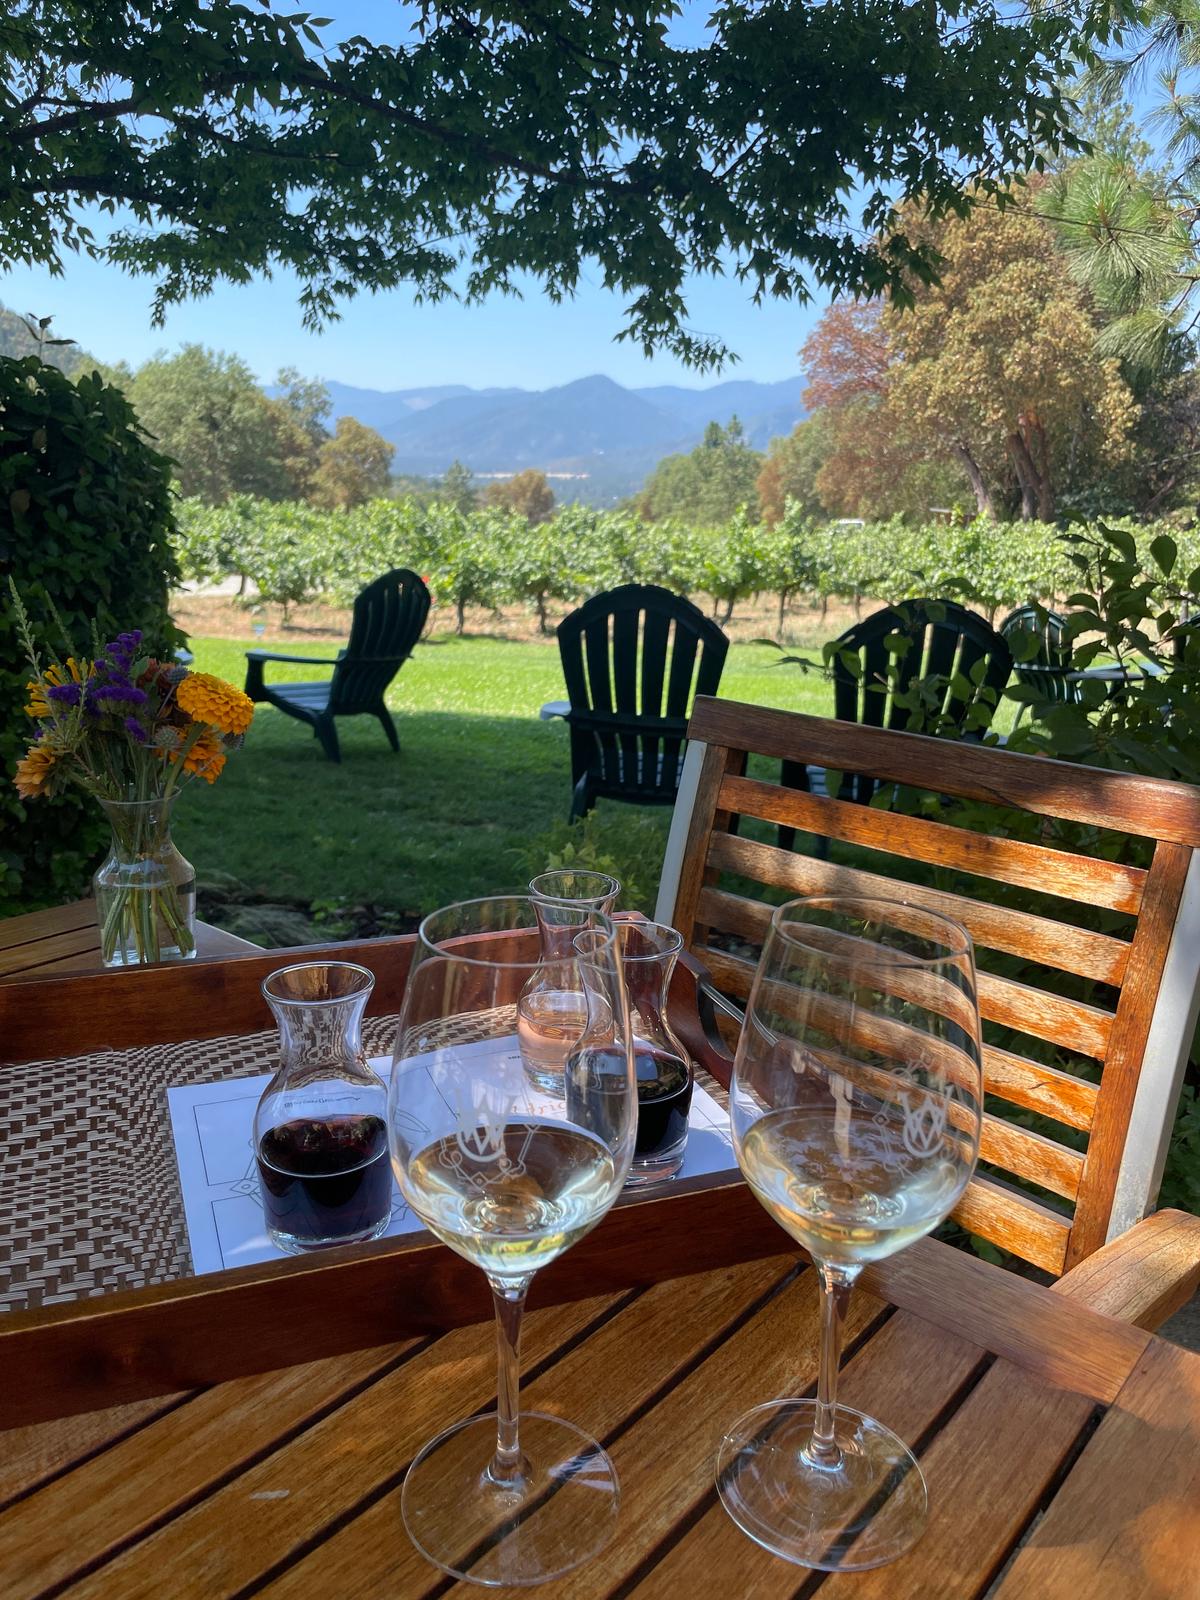 The lush view from a wine tasing table at Wooldridge Creek Winery in southern Ore. (Janna Graber)